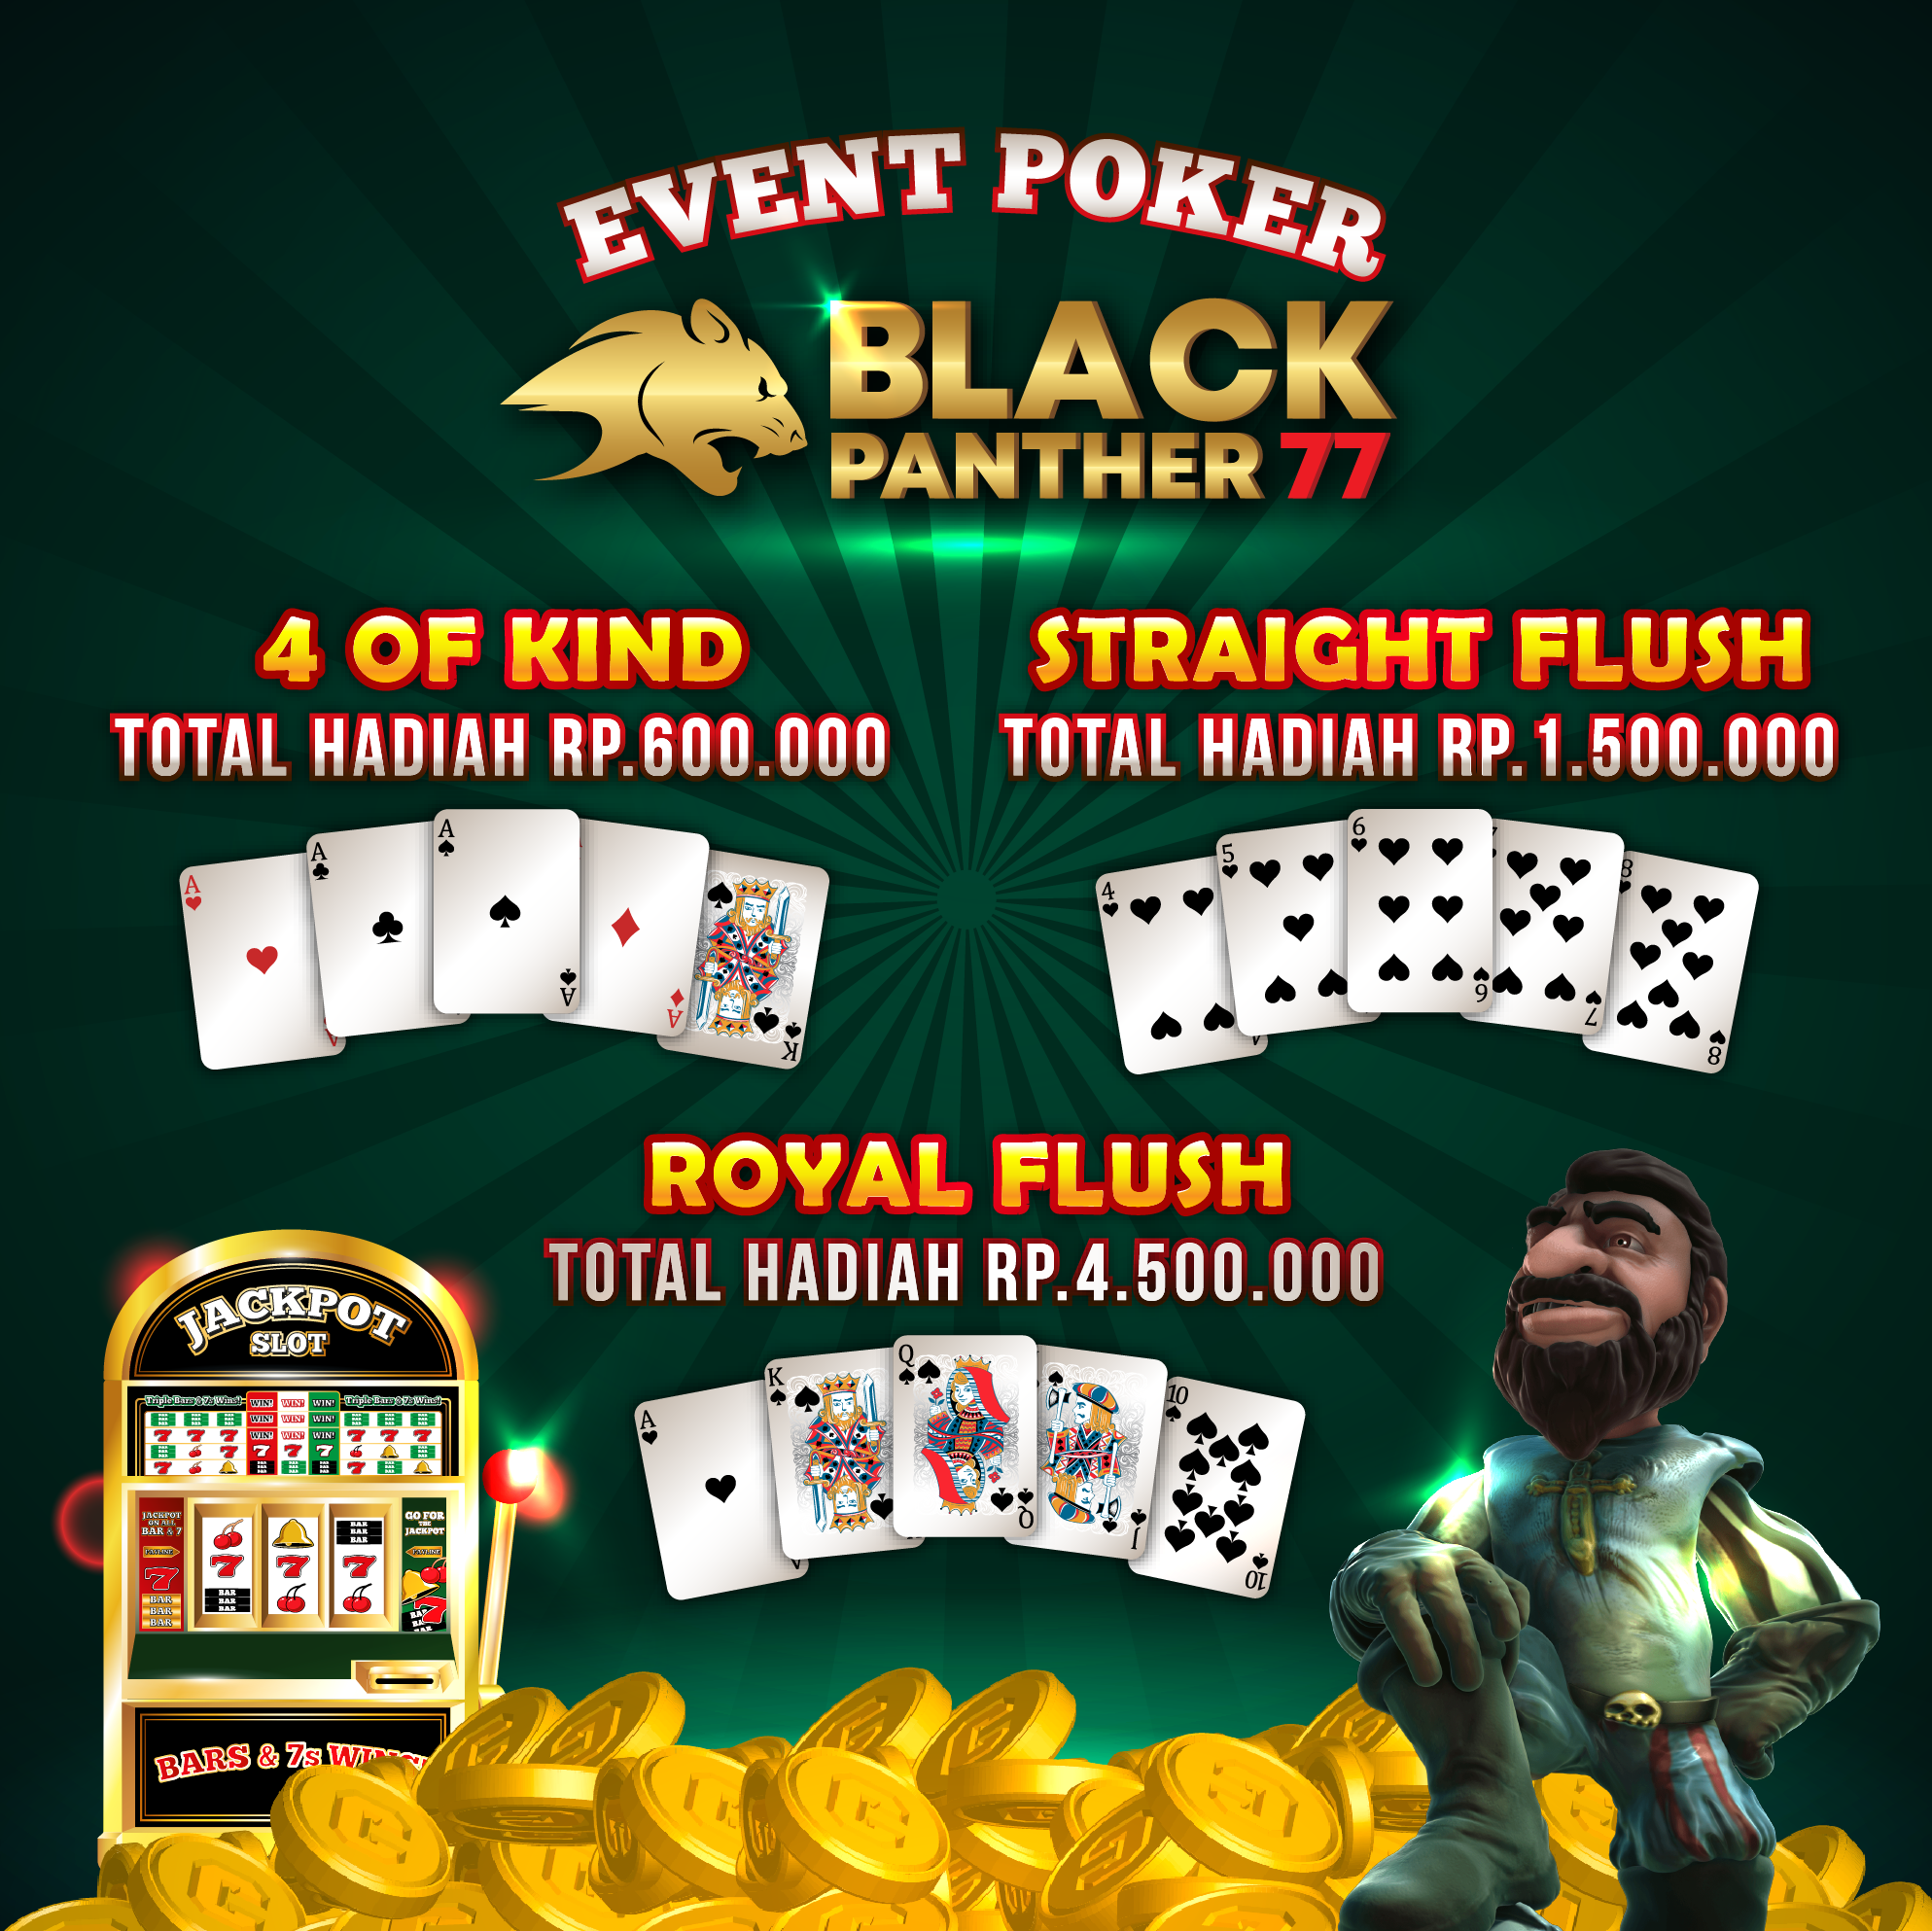 event poker black panther 77